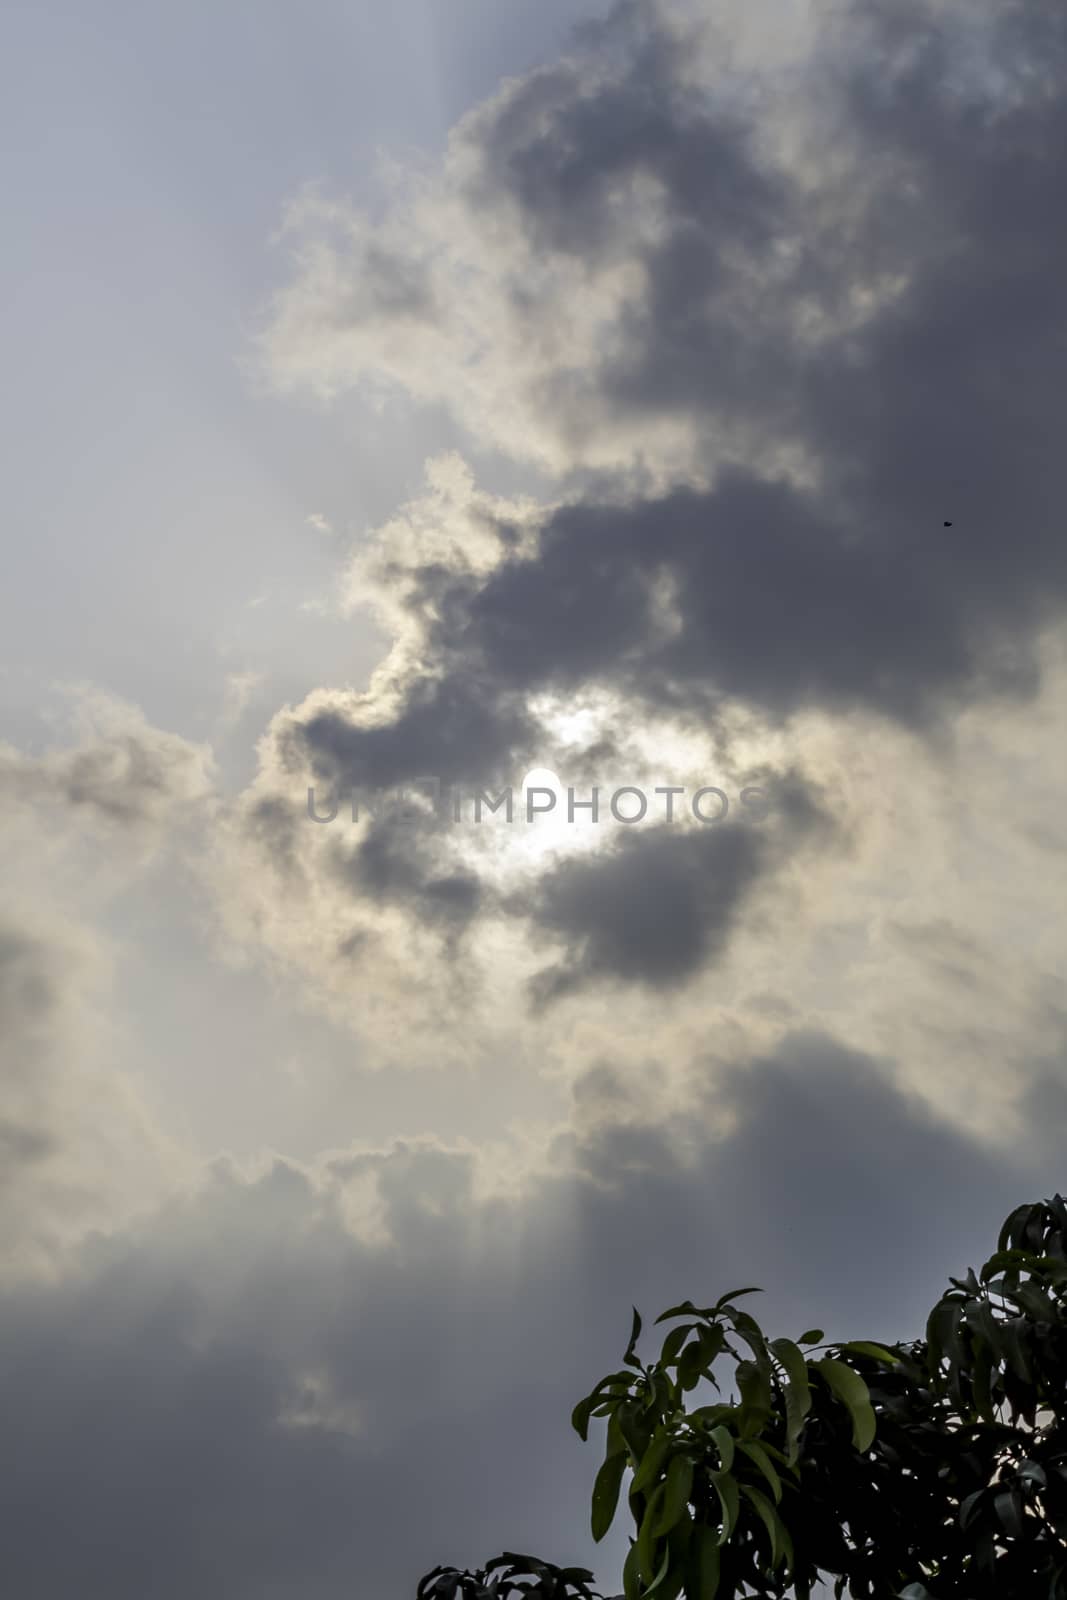 Dramatic sky with stormy clouds. Dark sky and dramatic black cloud before rain. Calcutta India by sudiptabhowmick